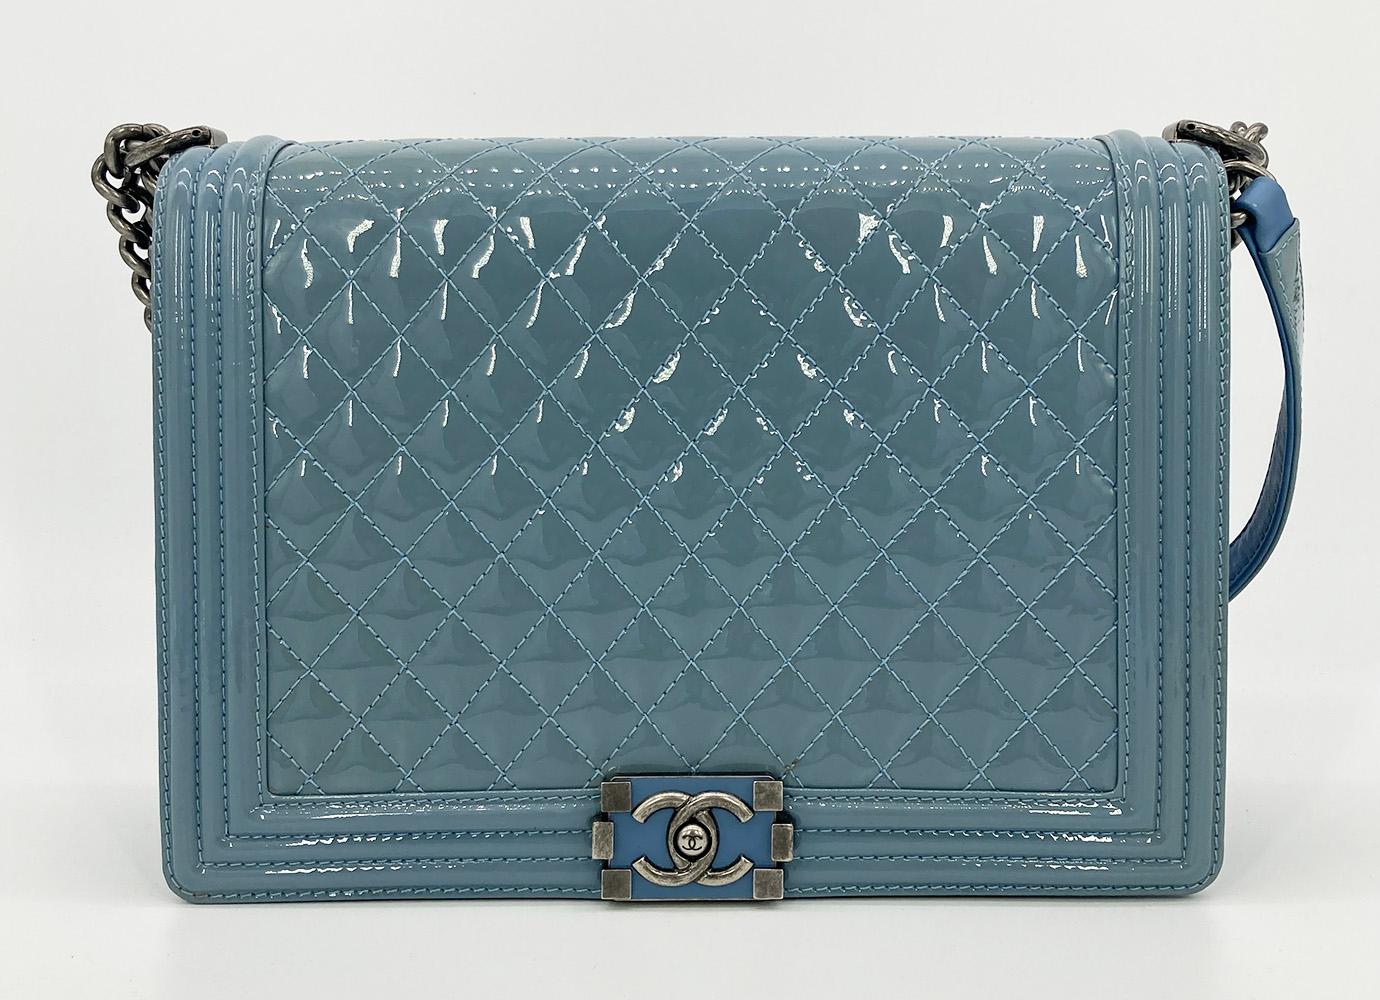 Chanel Light Blue Patent Large Boy Bag in good condition. Light blue patent leather trimmed with ruthenium hardware in signature le boy classic flap style. Front pinch latch closure opens via single flap to a blue patent and nylon interior with one